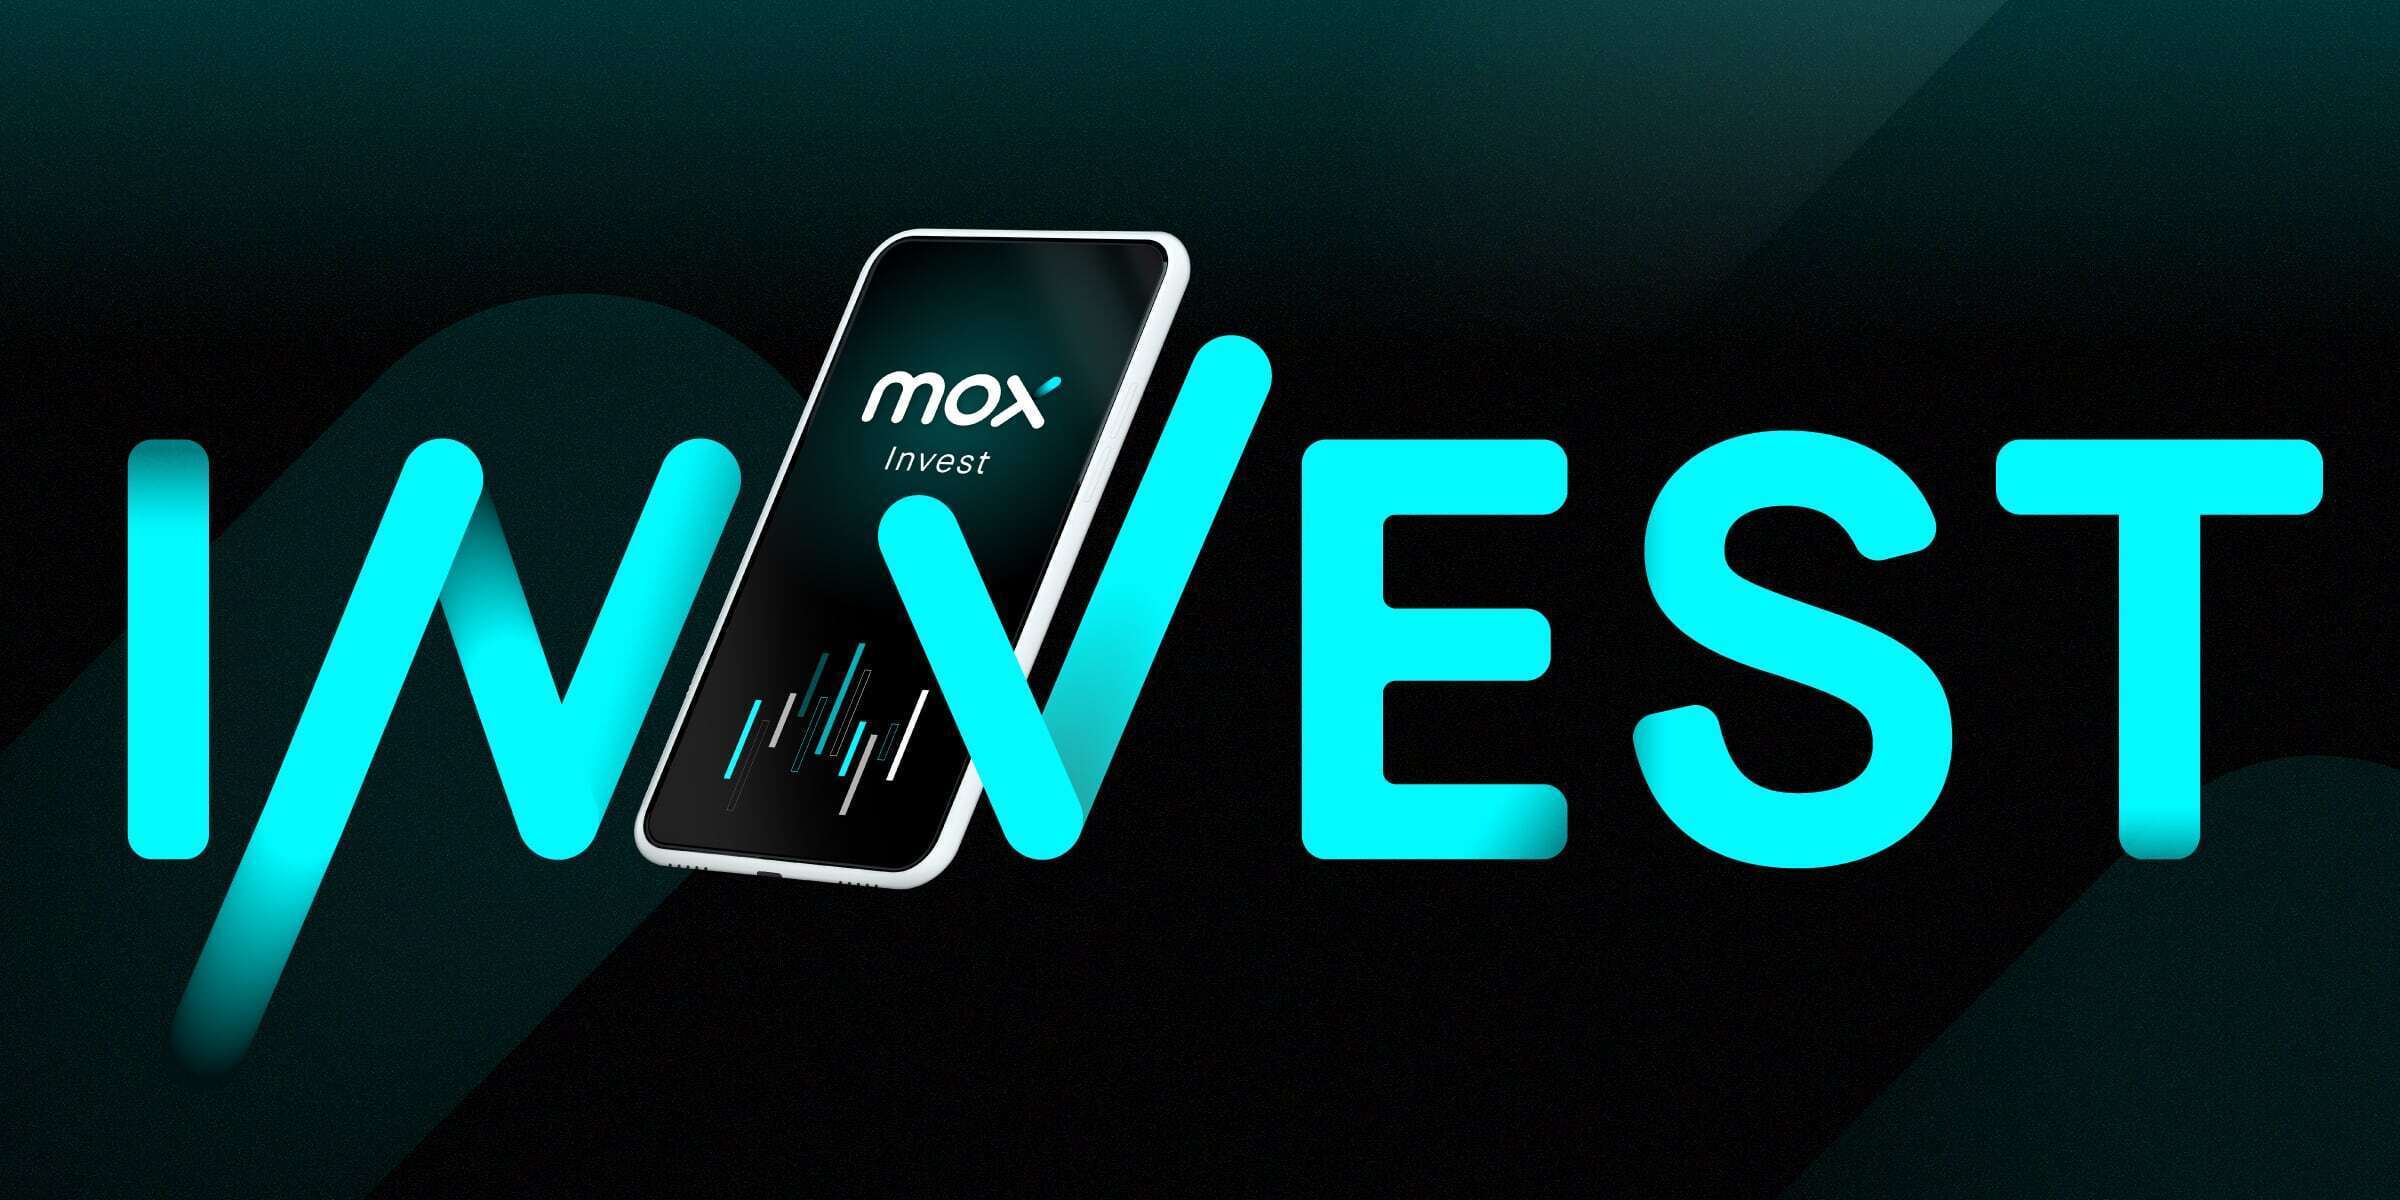 Mox Obtains Licence To Become the First Hong Kong Virtual Bank to Launch Hong Kong and U.S. Equity Trading Services